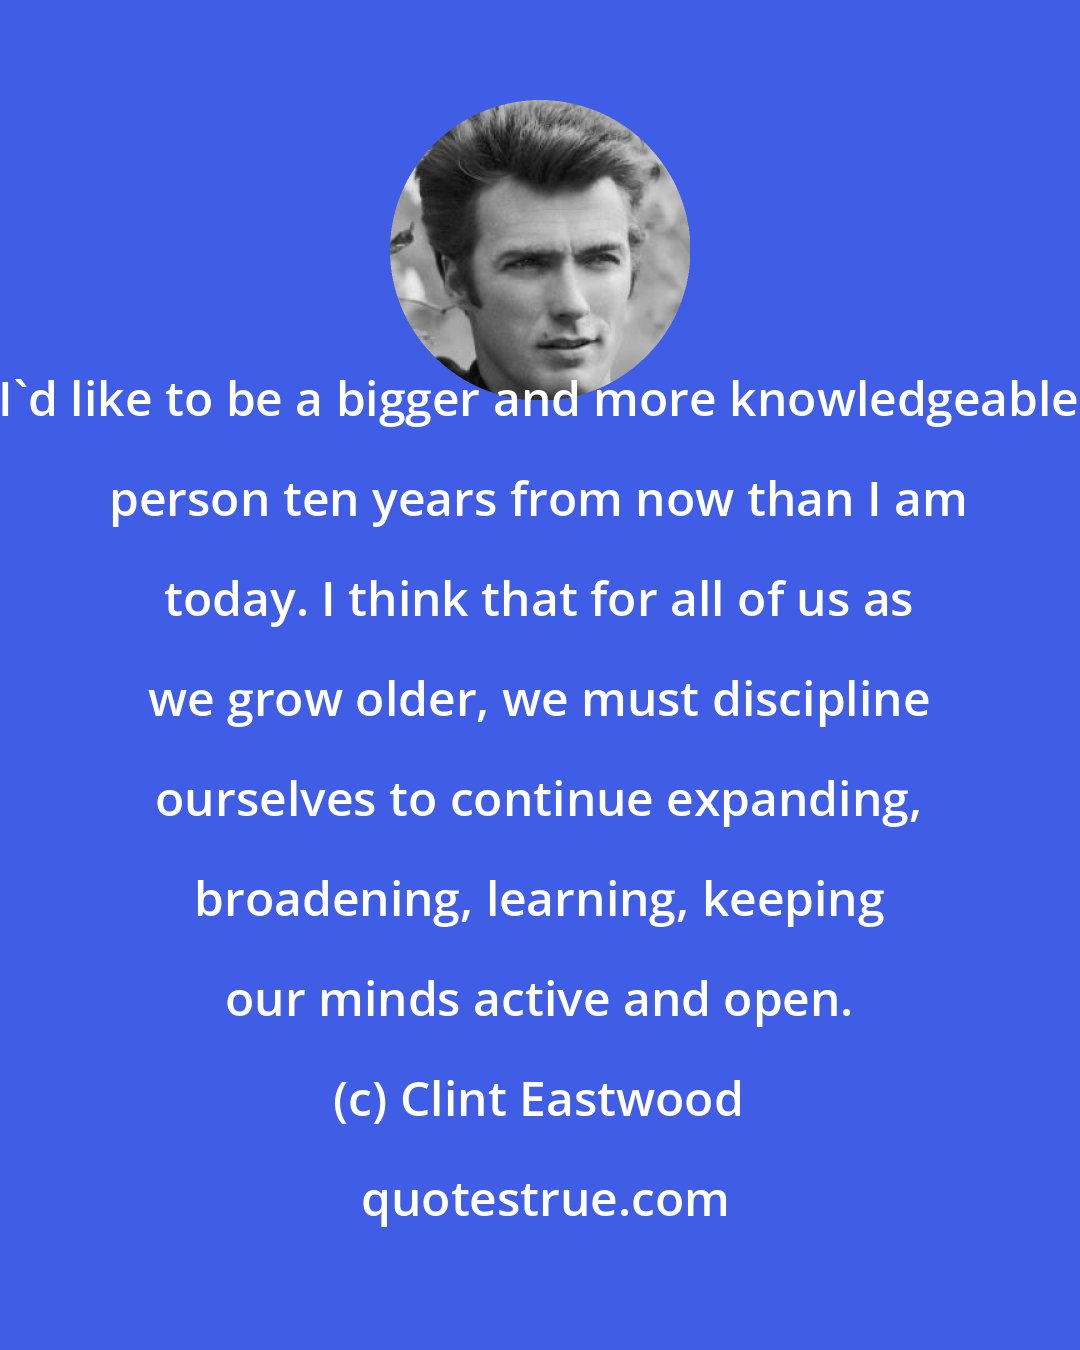 Clint Eastwood: I'd like to be a bigger and more knowledgeable person ten years from now than I am today. I think that for all of us as we grow older, we must discipline ourselves to continue expanding, broadening, learning, keeping our minds active and open.